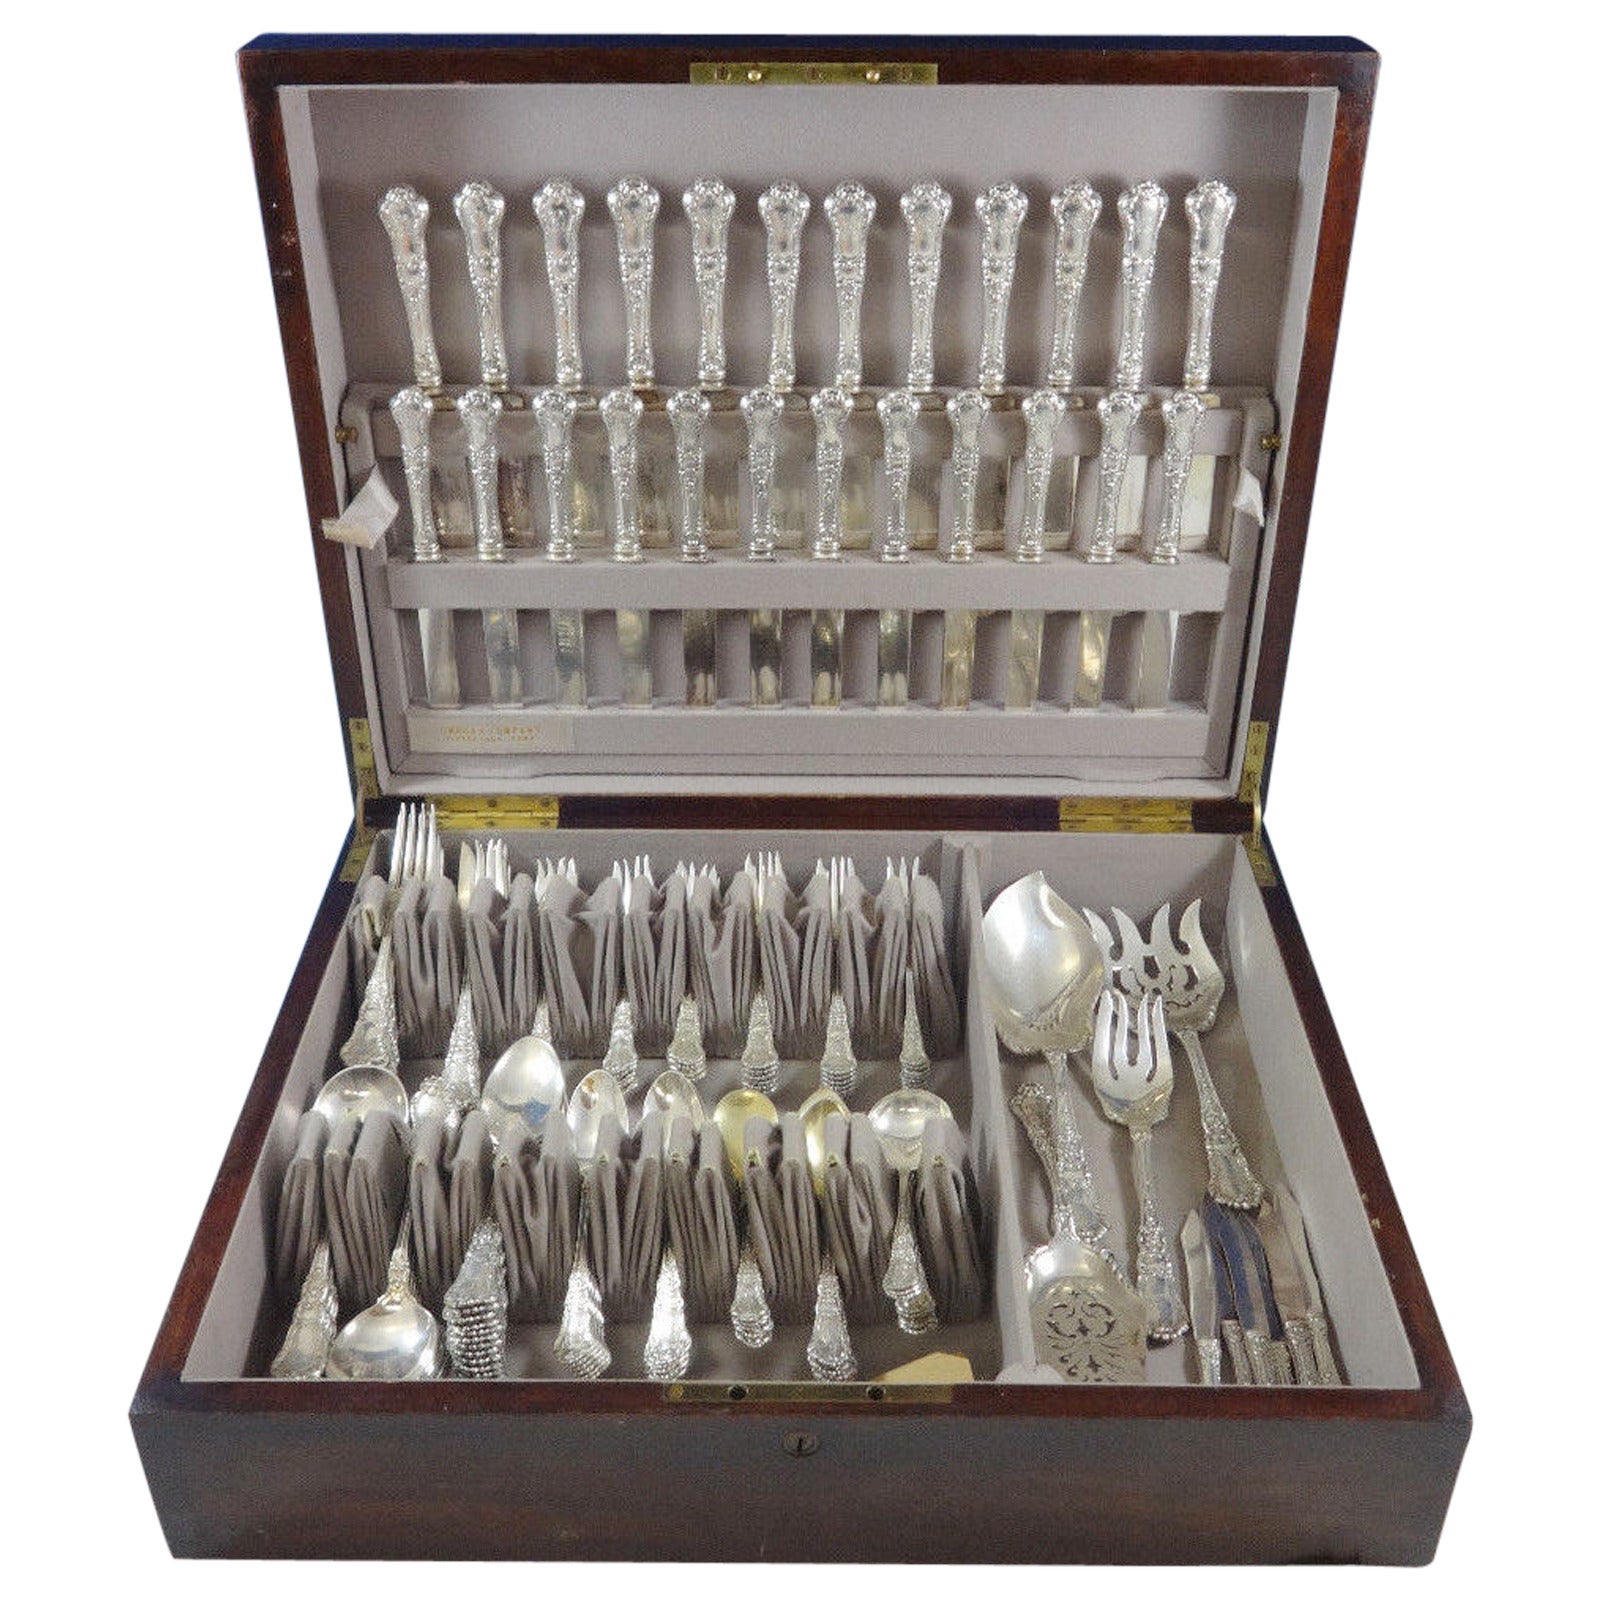 Monumental Baronial Old by Gorham circa 1897 sterling silver flatware set, 144 pieces with superb lion motif. This set includes:

12 dinner knives, 9 3/4